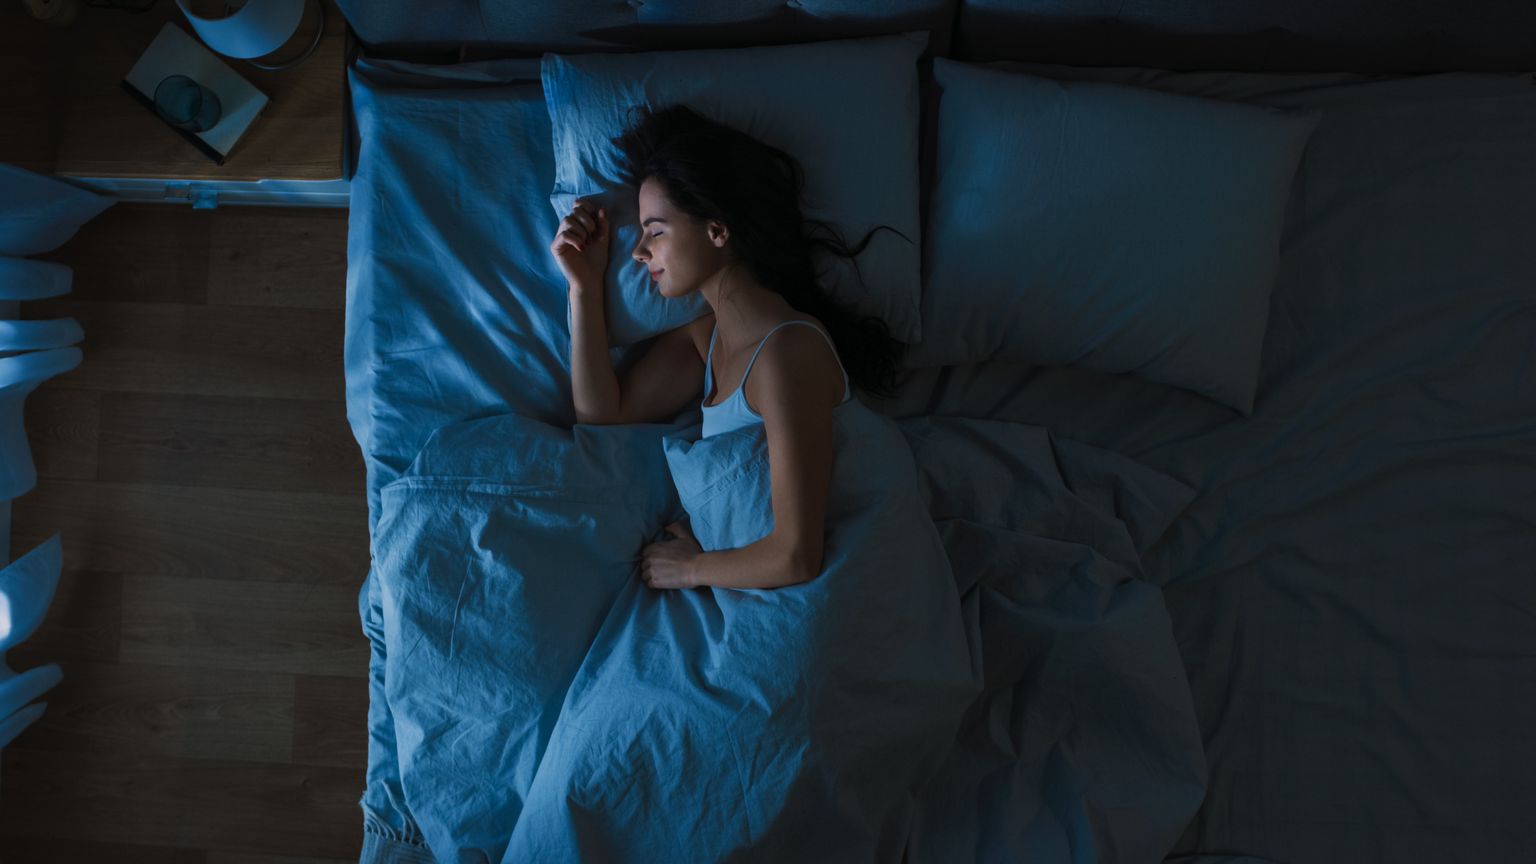 Top view of beautiful young woman sleeping comfortably on a bed in his bedroom at night. Blue night colors with cold weak lamppost light shining through the window.